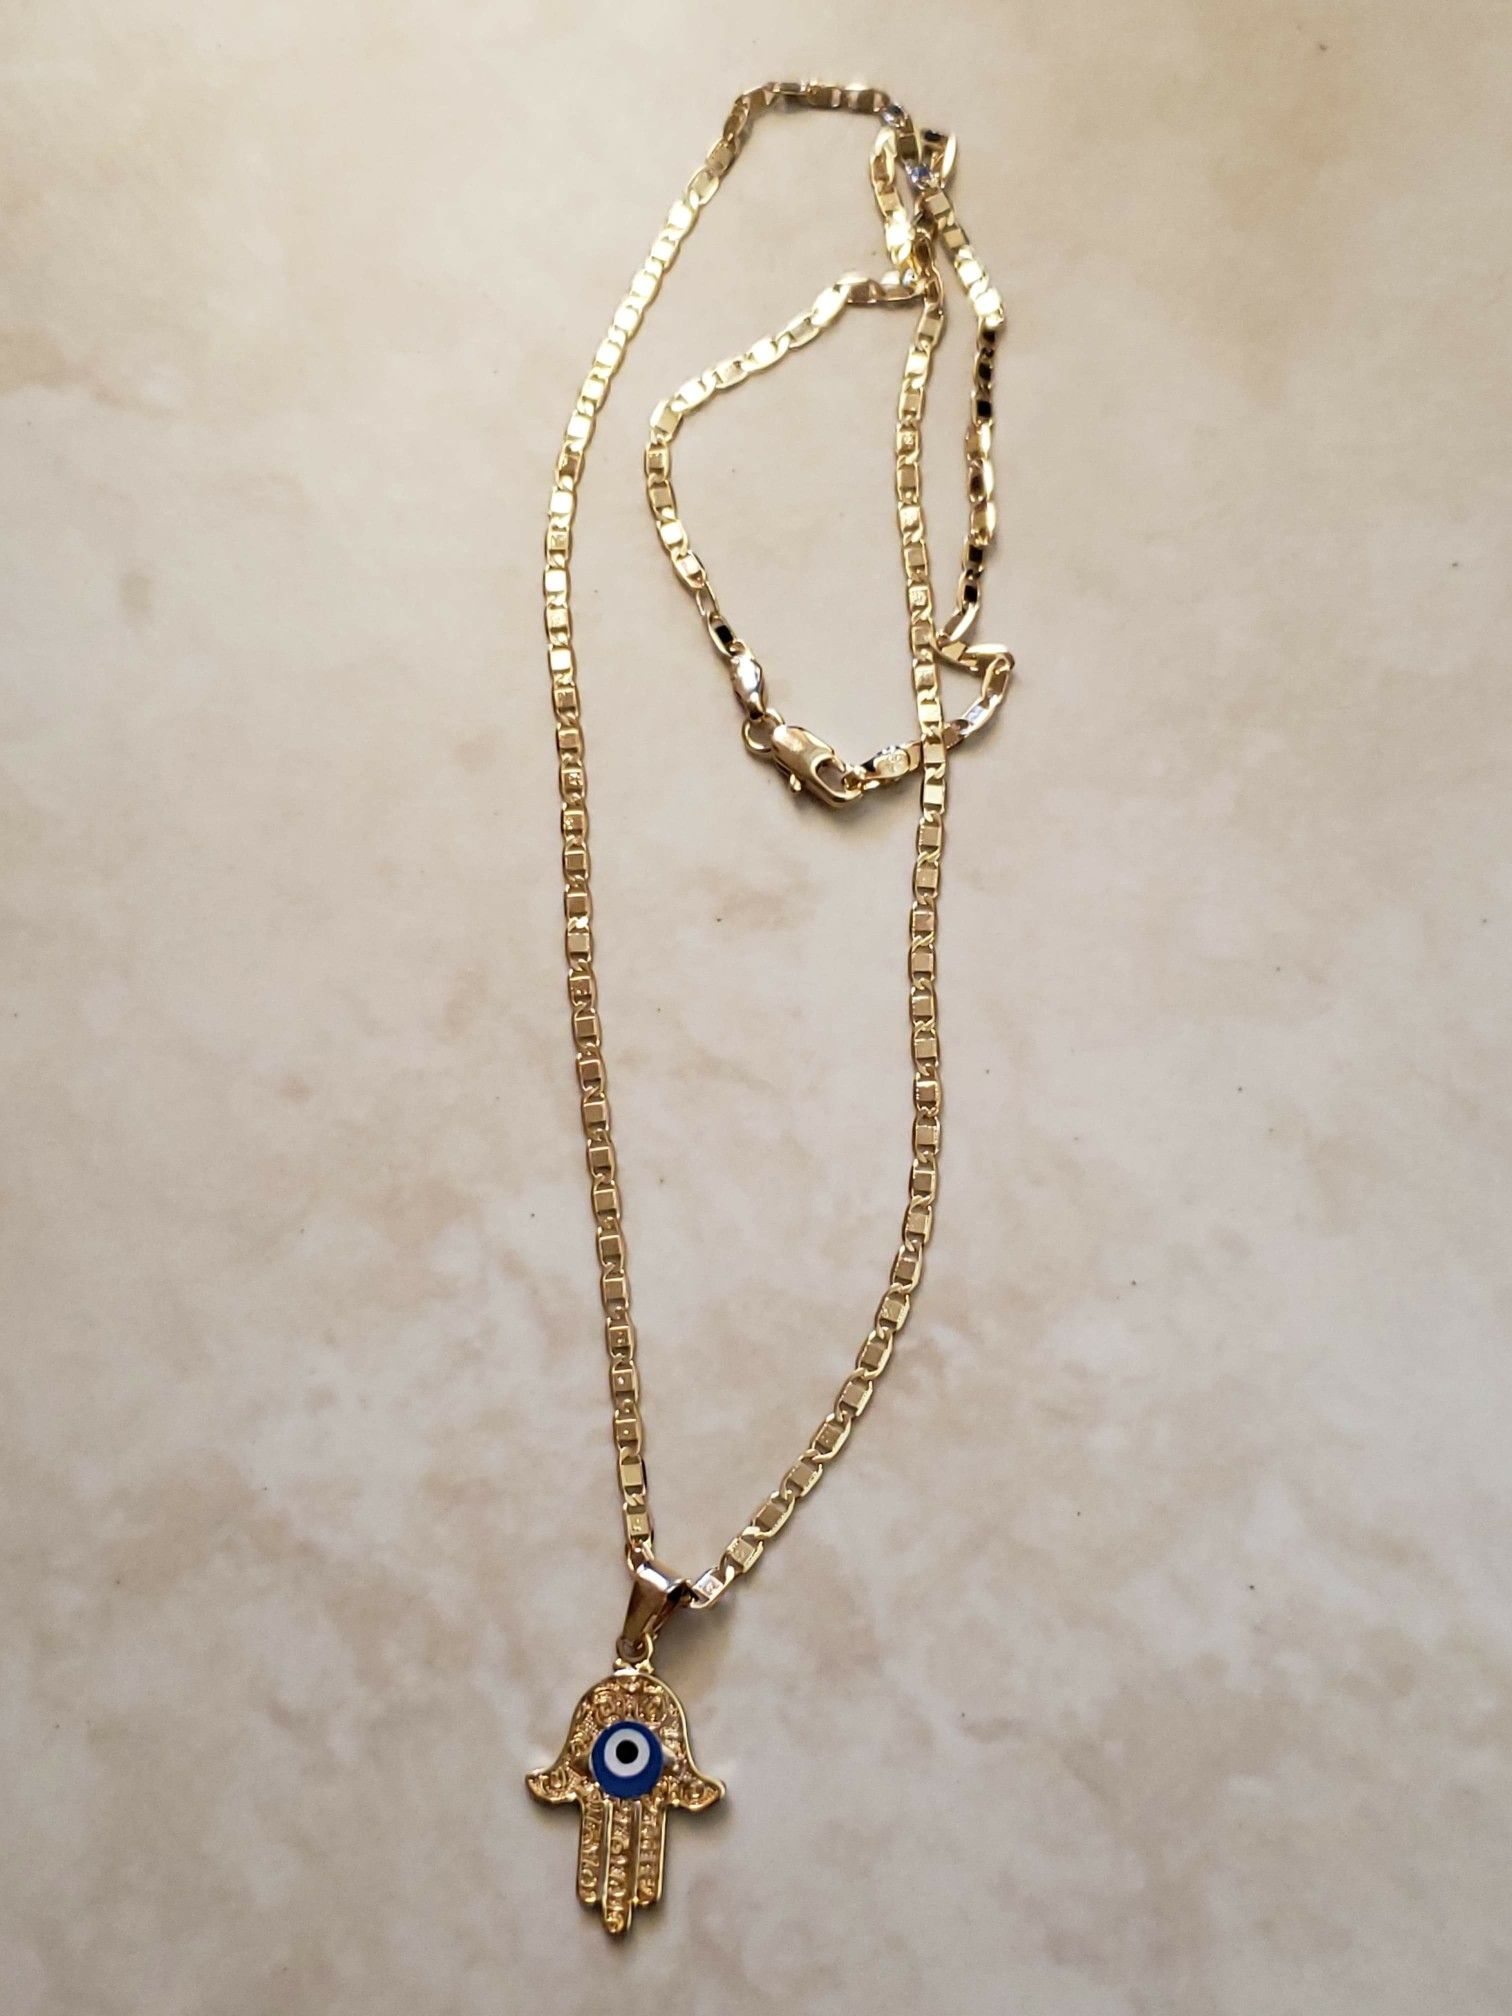 18k GOLD FILLED CHAIN and eye PENDANT 20 inch CHAIN